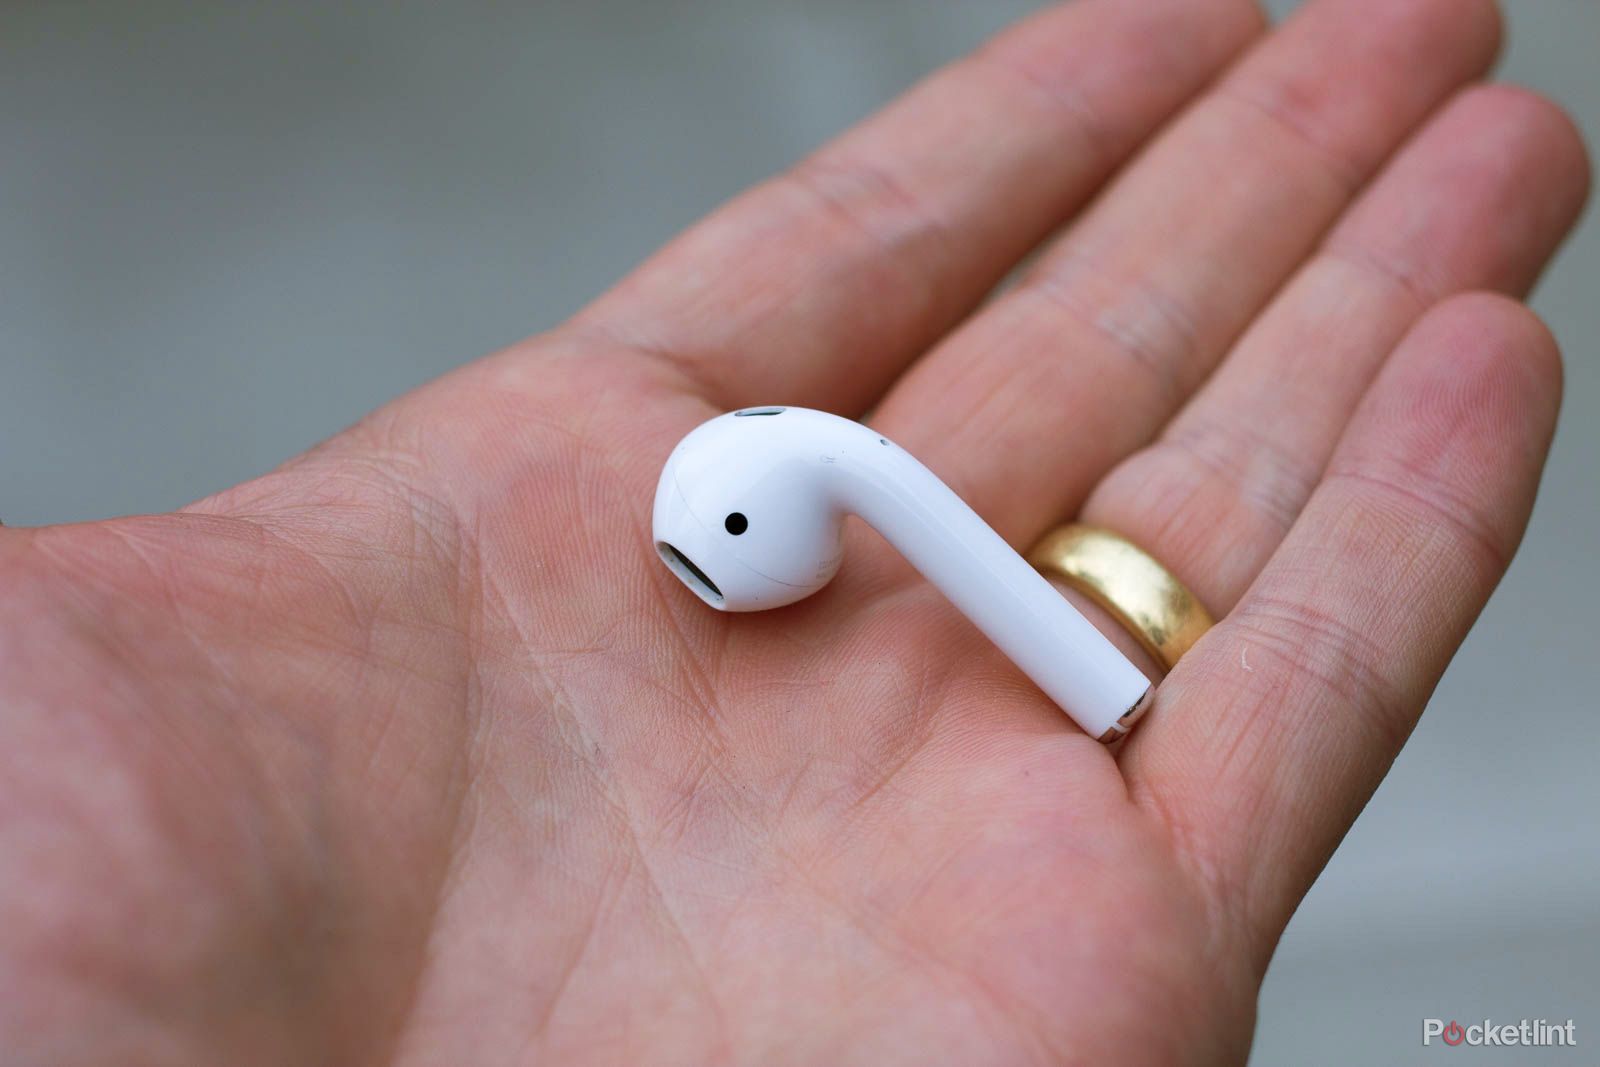 Amazon and Google AirPods coming 2019 both said to rival Apple image 1